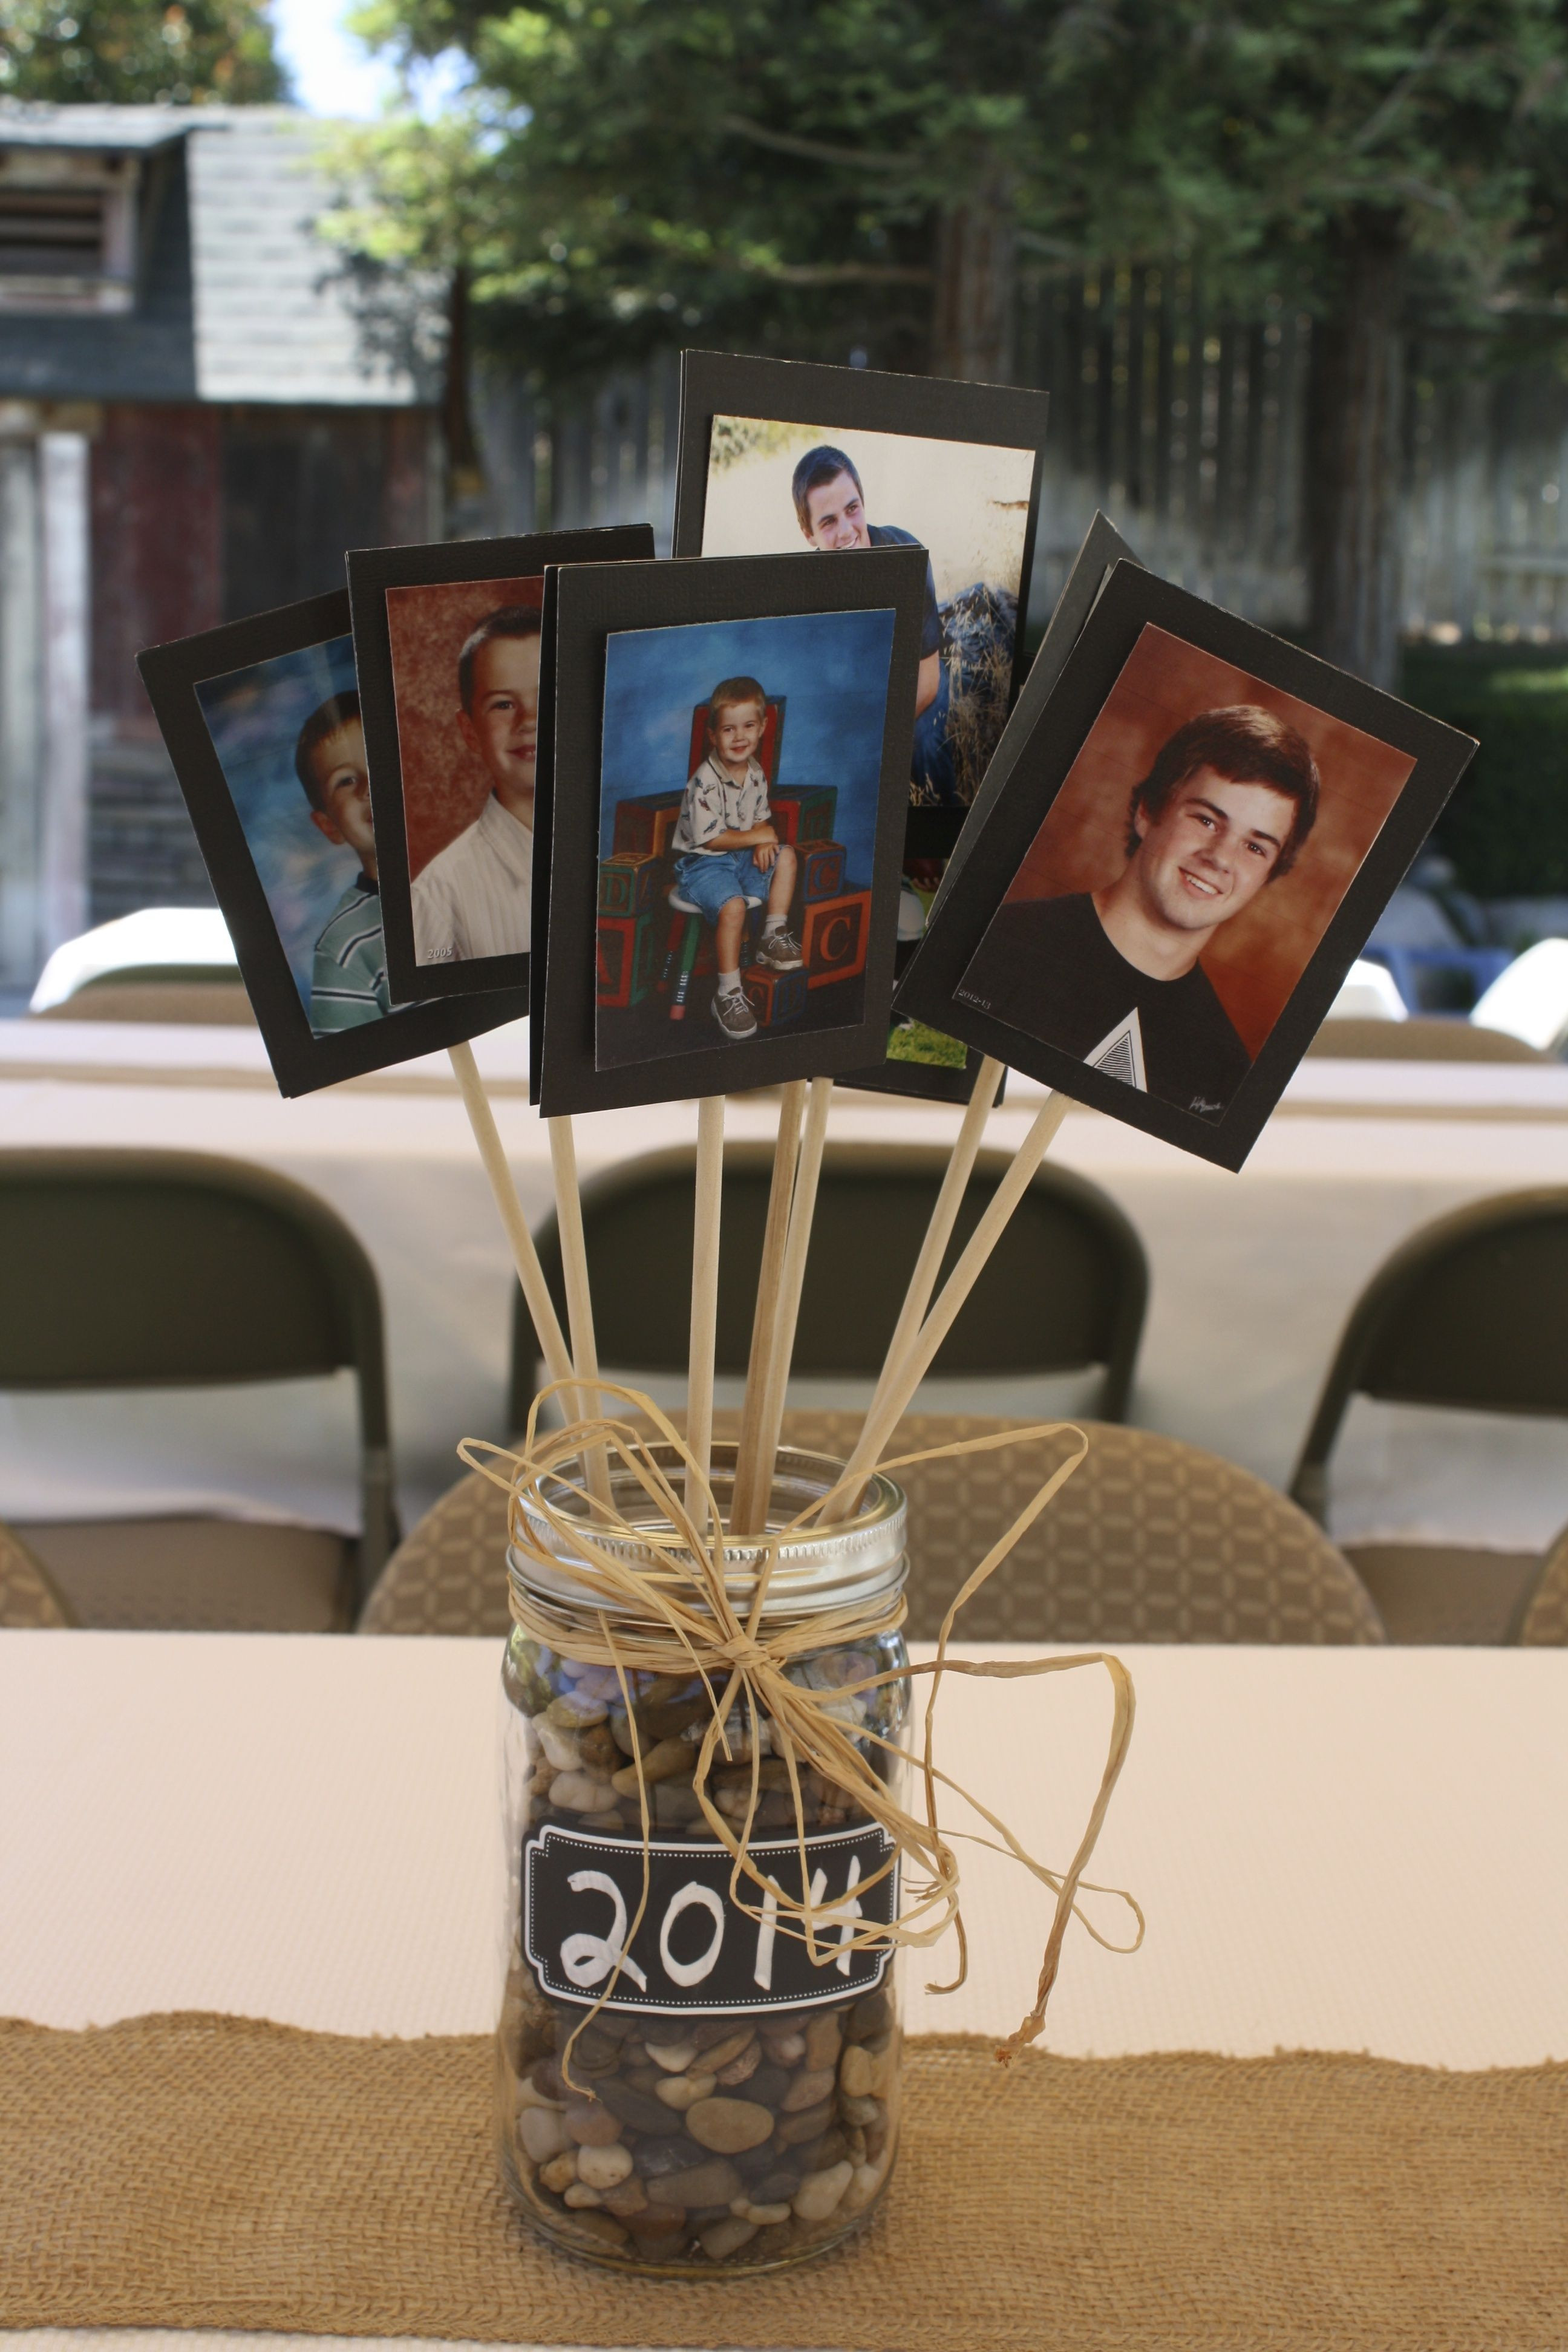 College Graduation Party Ideas For Him
 Centerpiece for tables at a graduation party Good for